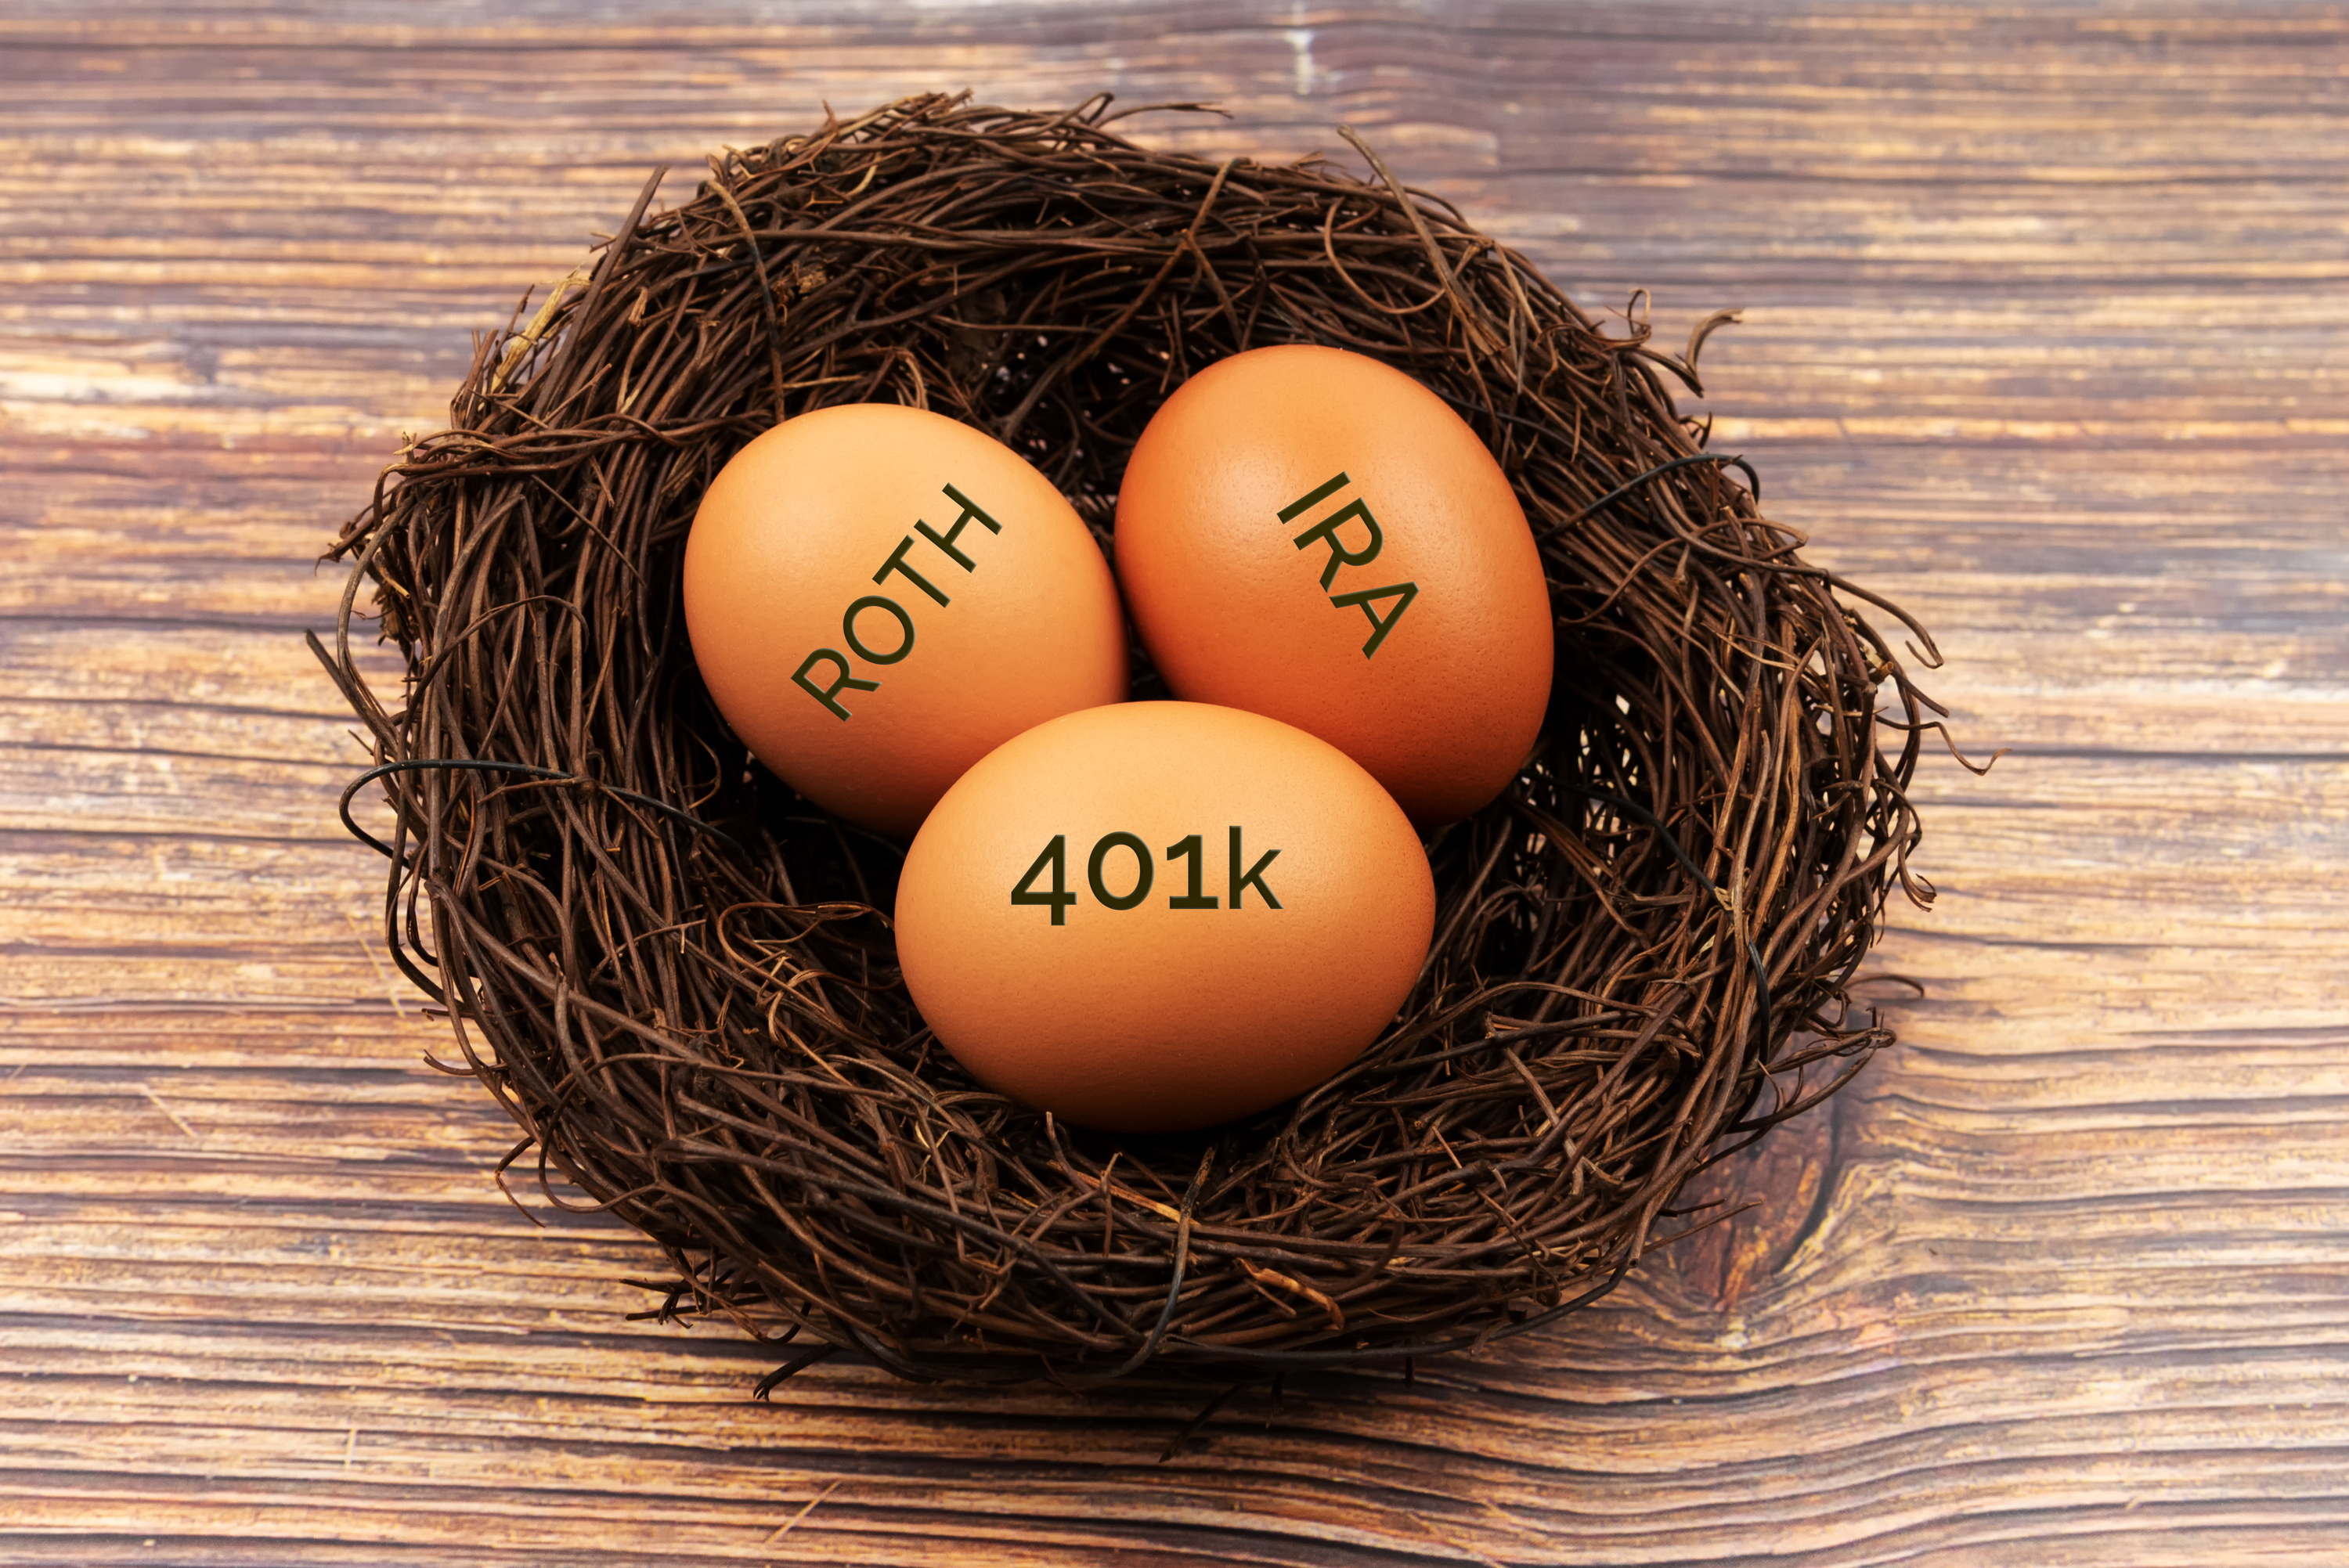 Eggs in a nest labeled Roth IRA